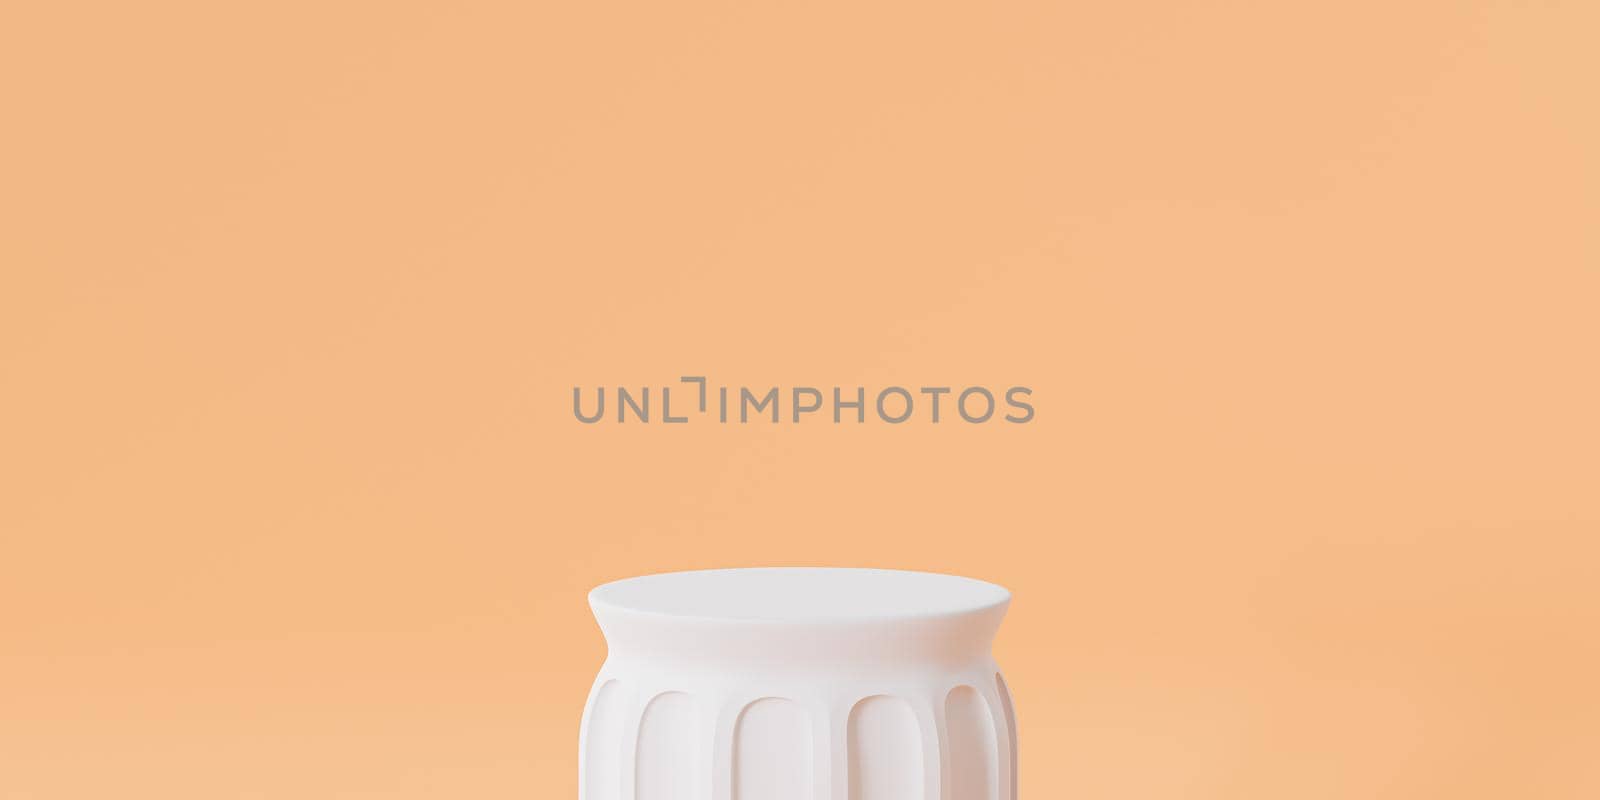 White pillar podium or pedestal for products or advertising on pastel orange banner background with copy space, 3d render